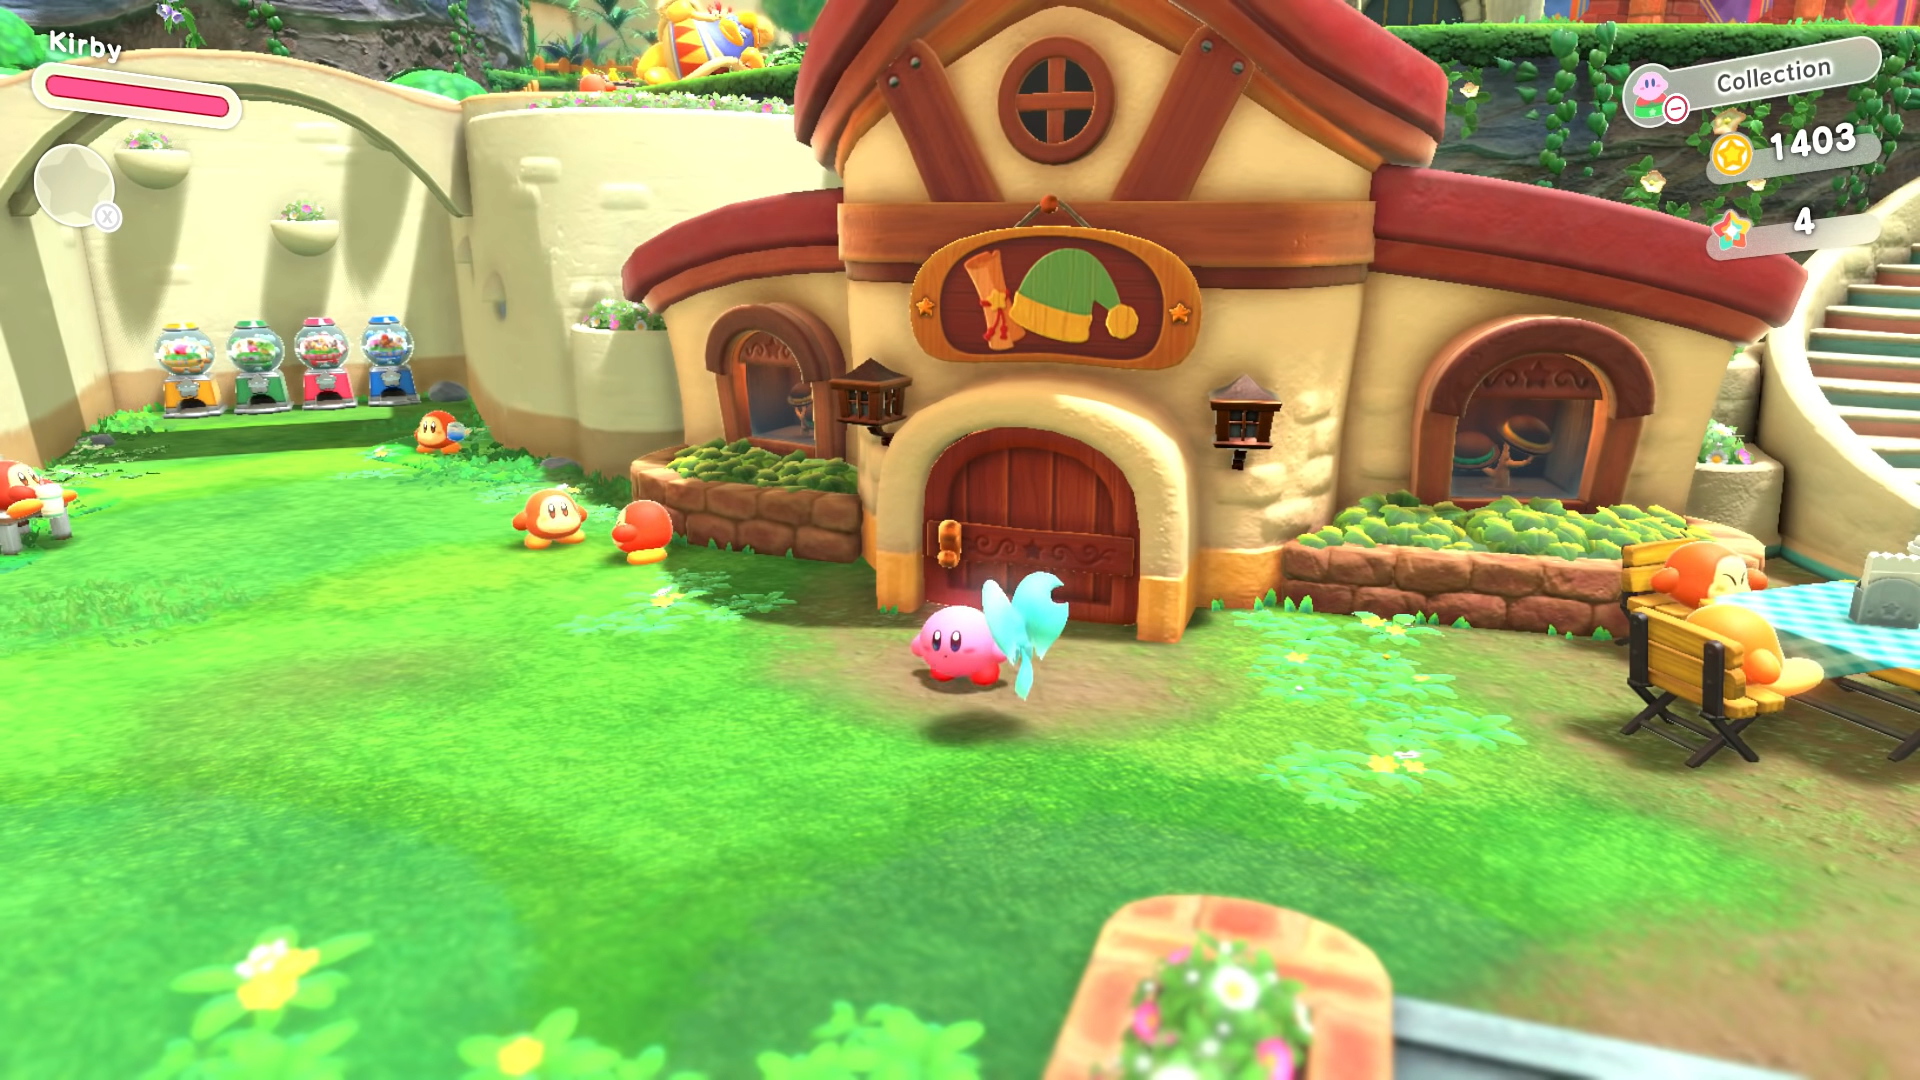 Kirby And The Forgotten Land One Year Anniversary Gift Code Shared